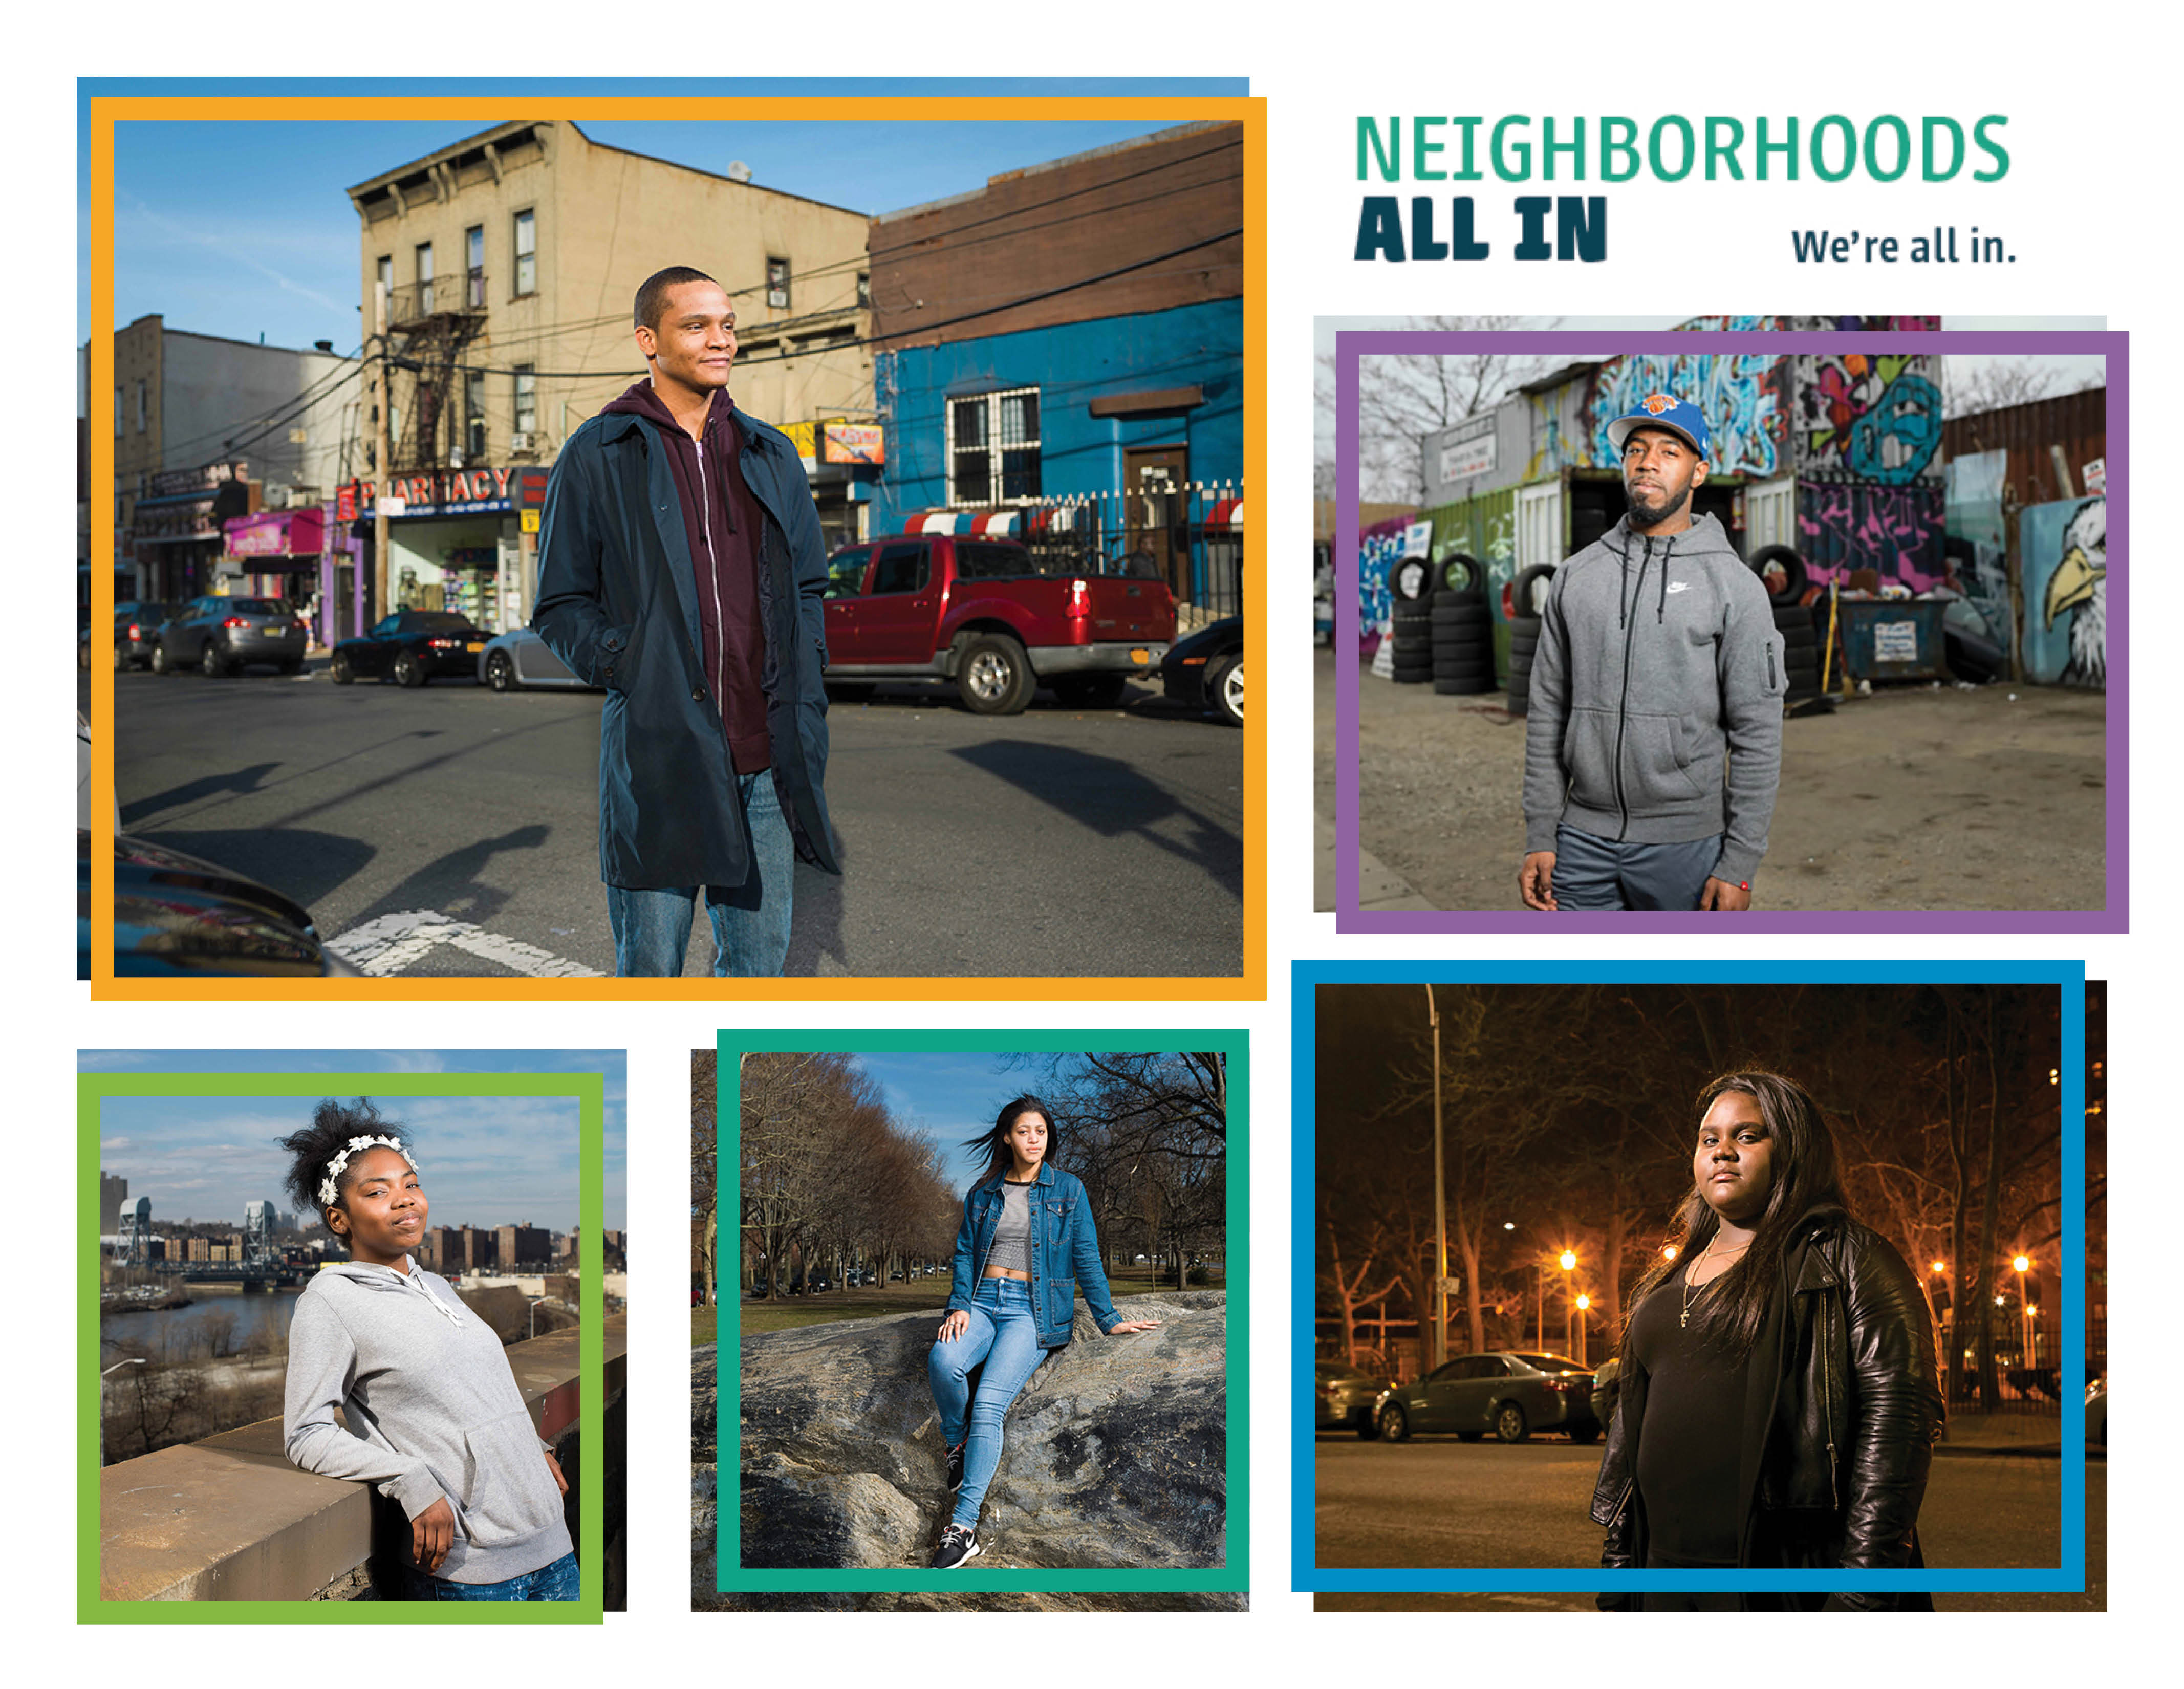 5 Images of People Representing All 5 New York Boroughs